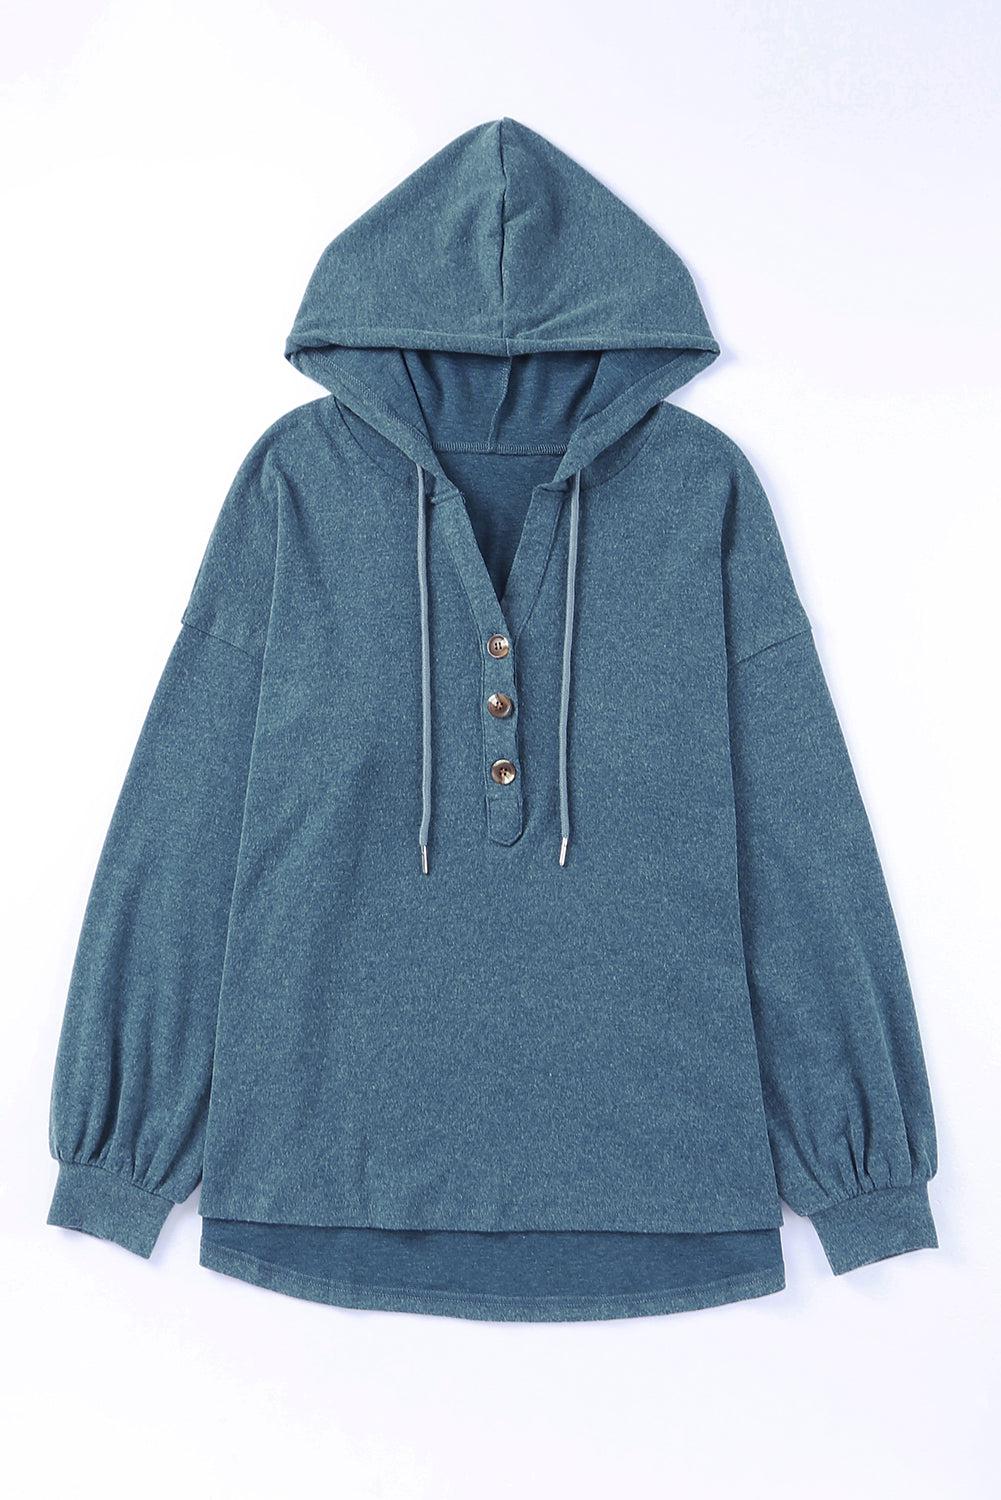 Buttoned Drop Shoulder High-Low Hoodie BLUE ZONE PLANET